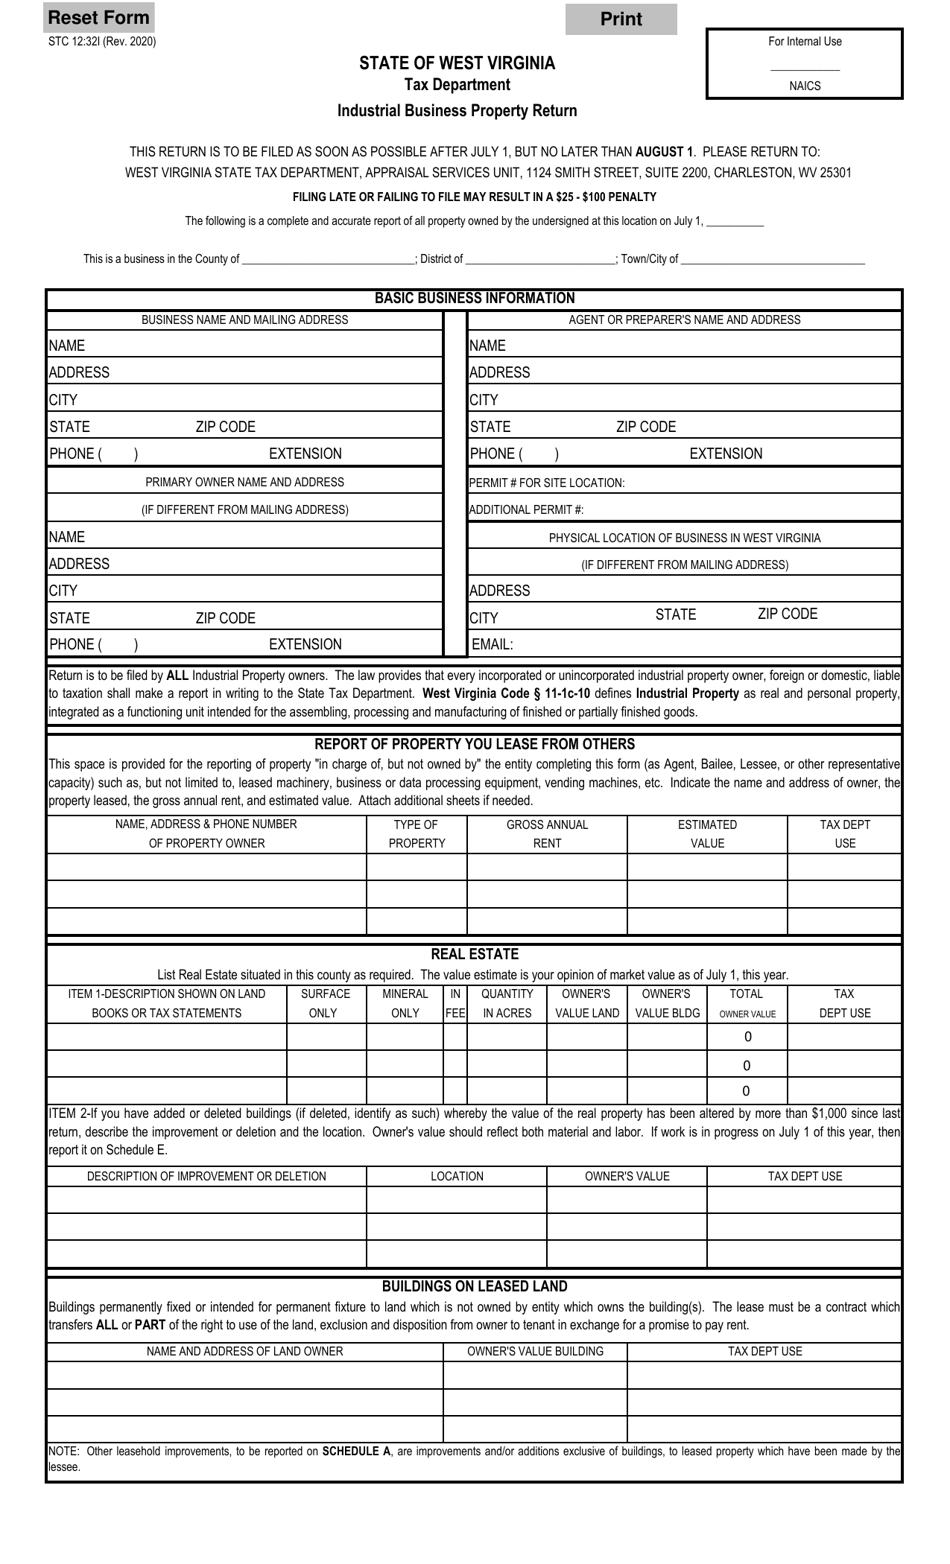 Form STC12:32I Industrial Business Property Return - West Virginia, Page 1